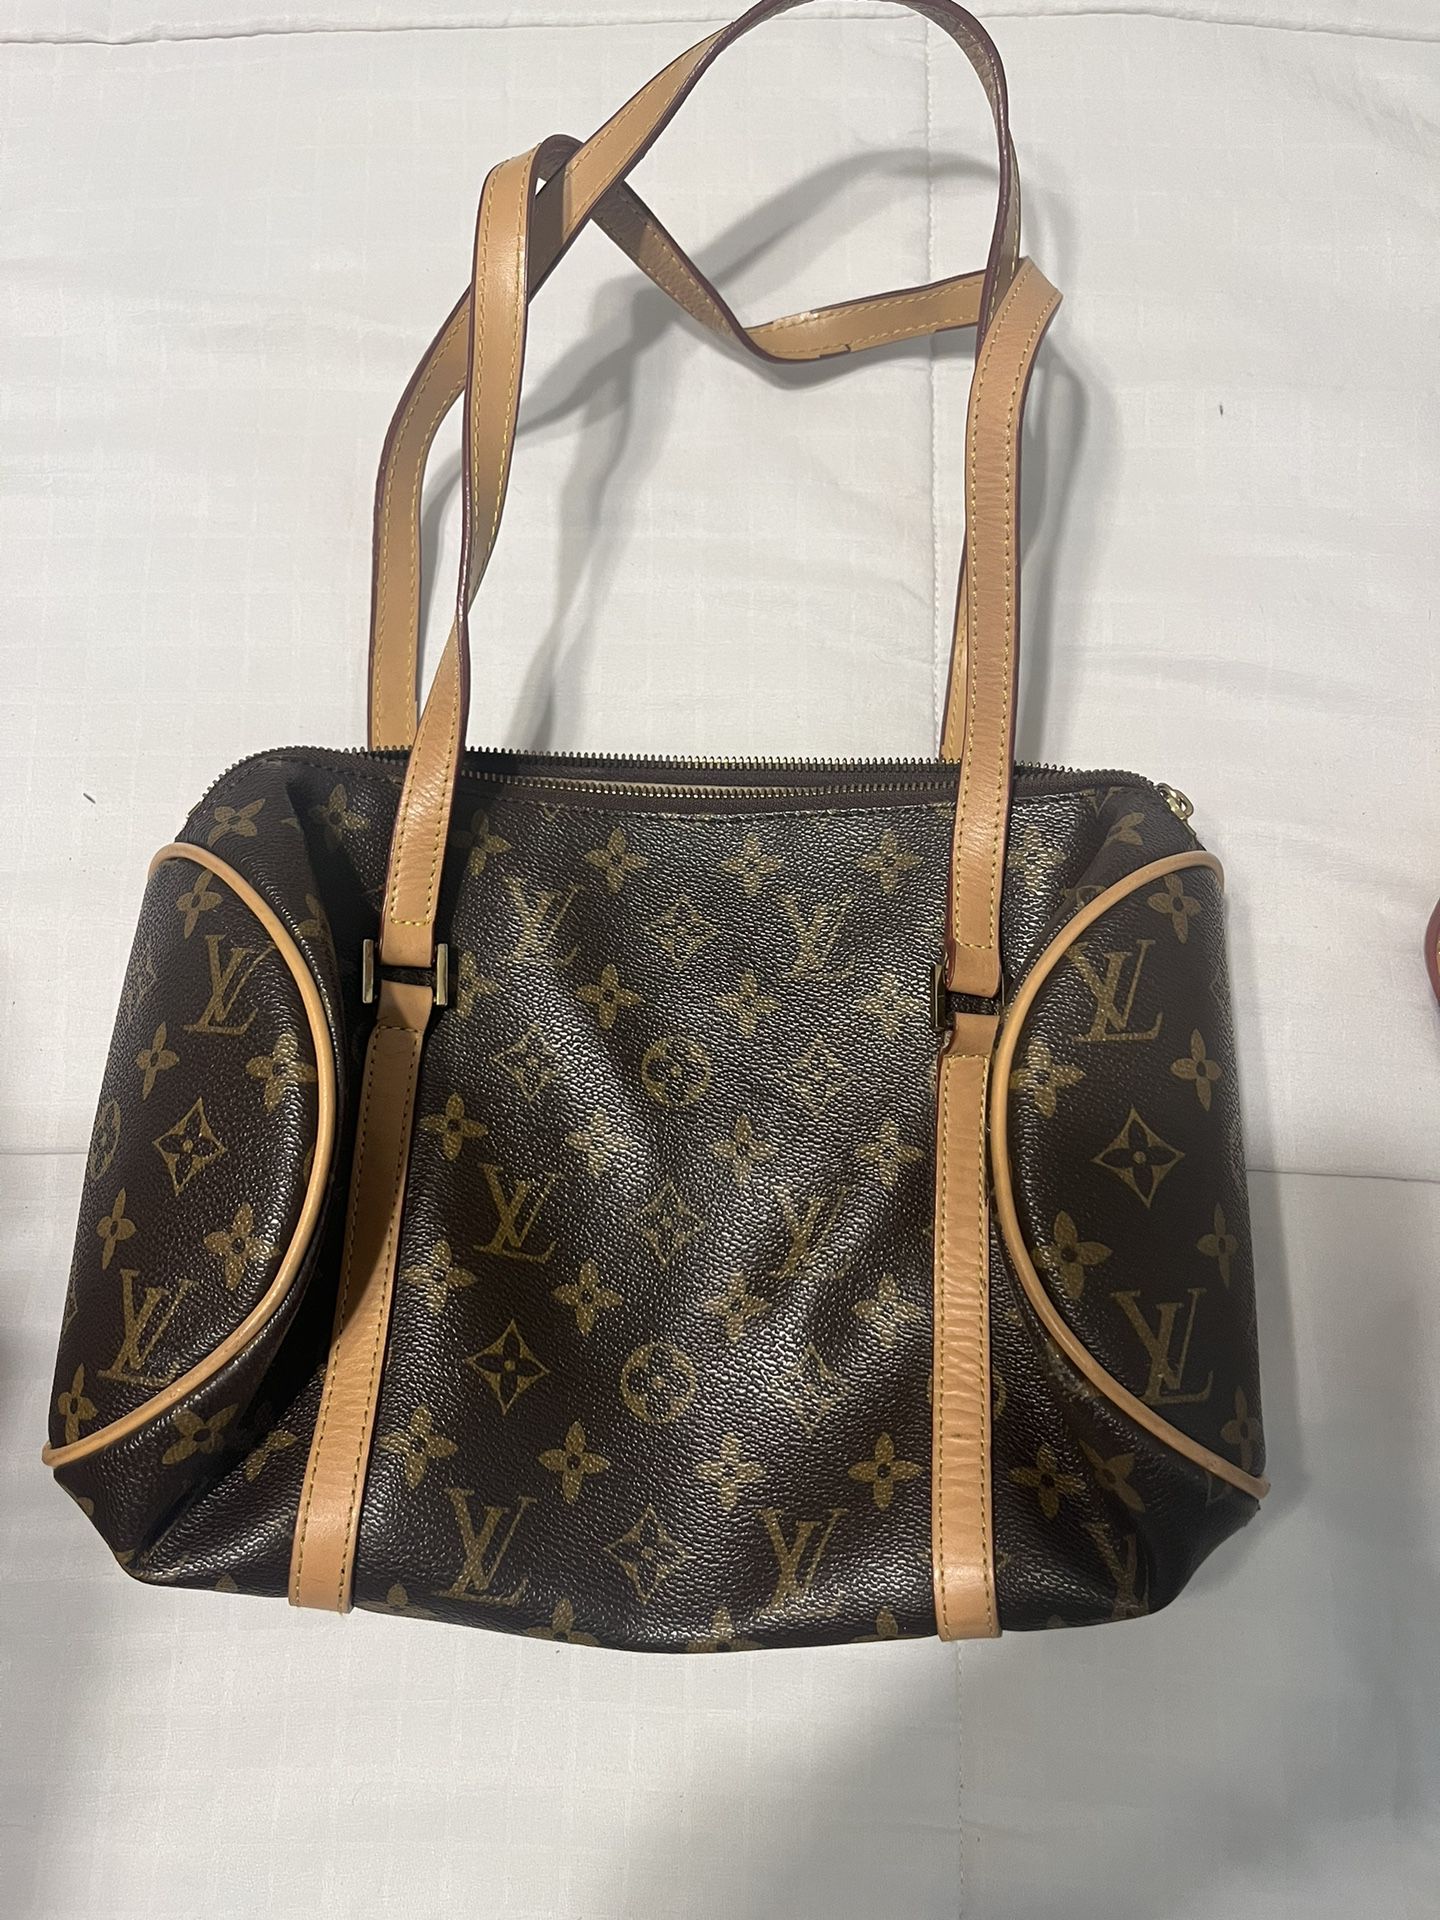 Louis Vuitton Book Bag for Sale in Aloma, FL - OfferUp